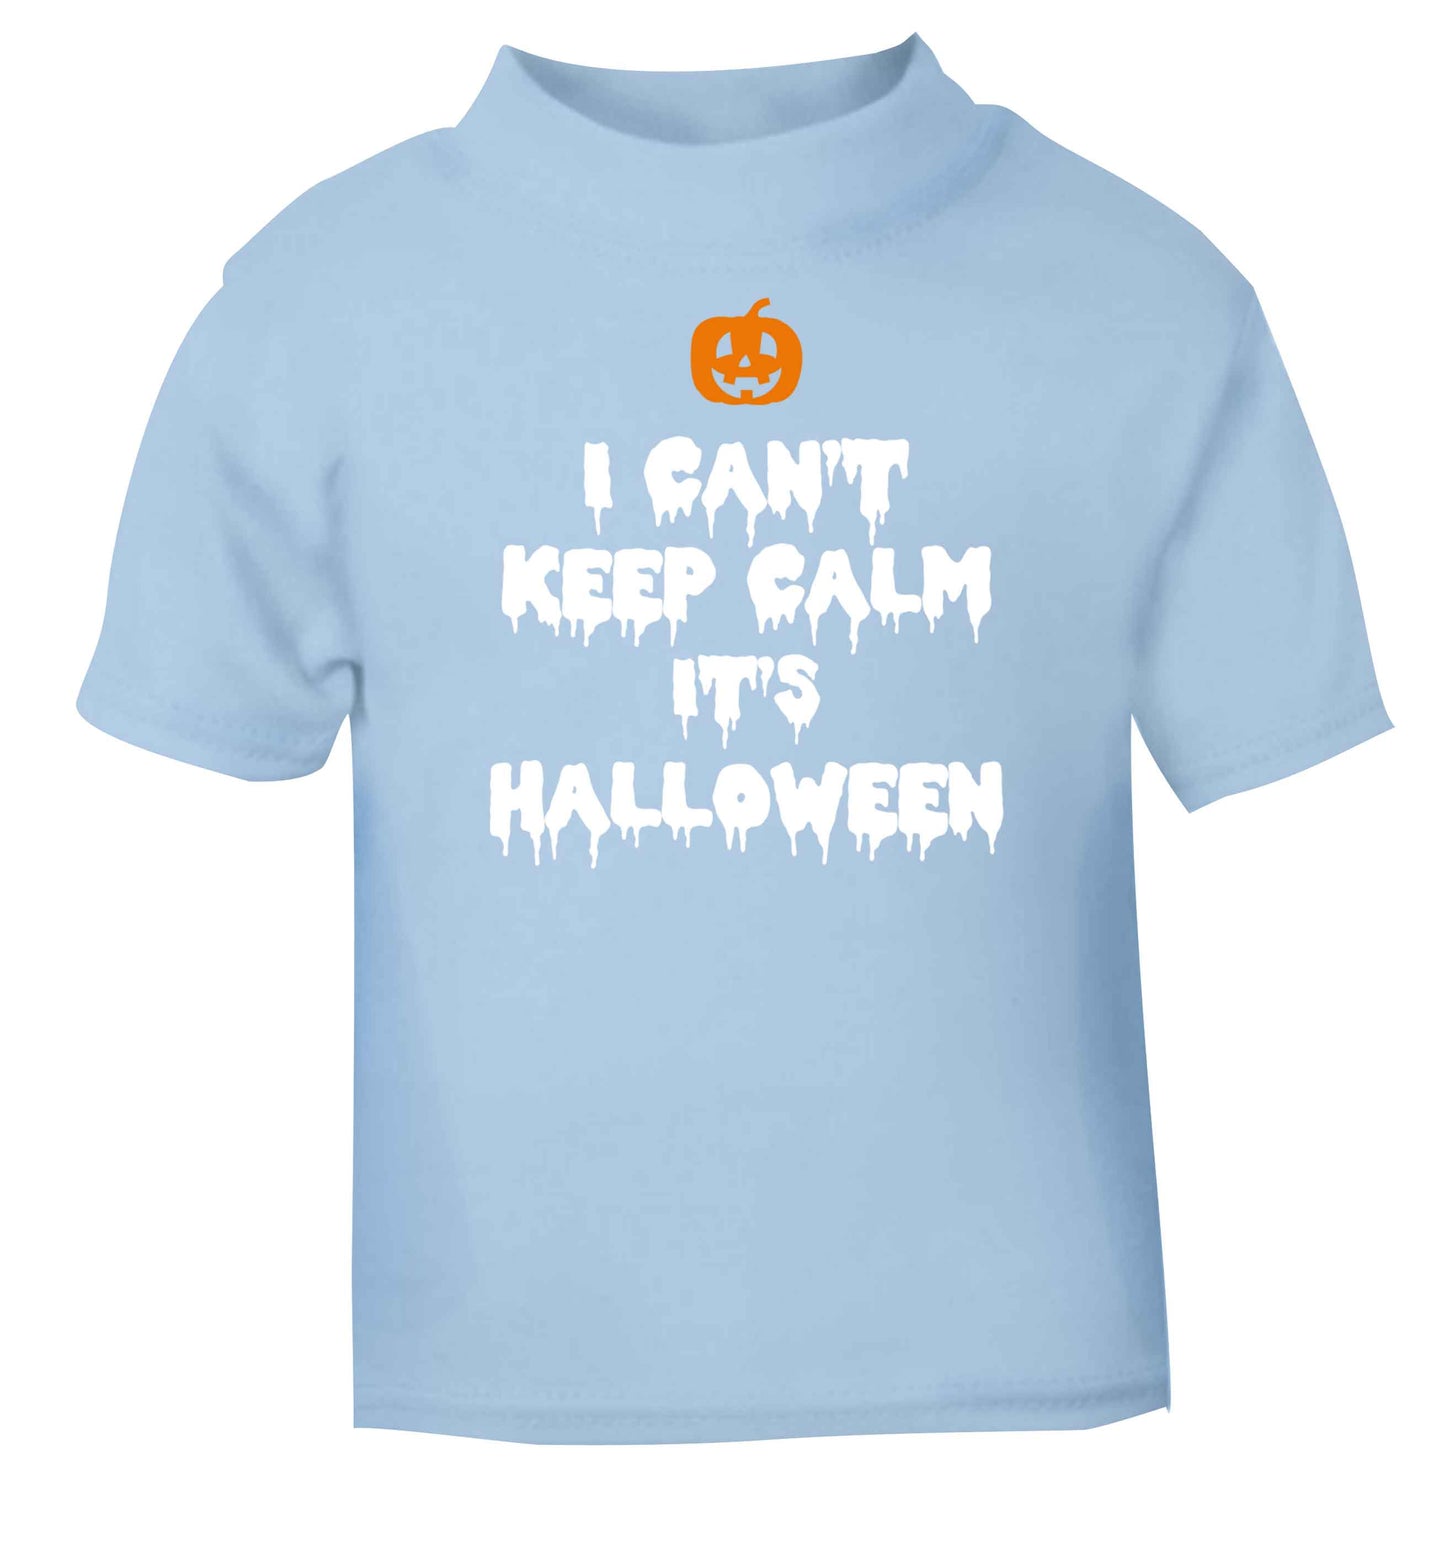 I can't keep calm it's halloween light blue baby toddler Tshirt 2 Years